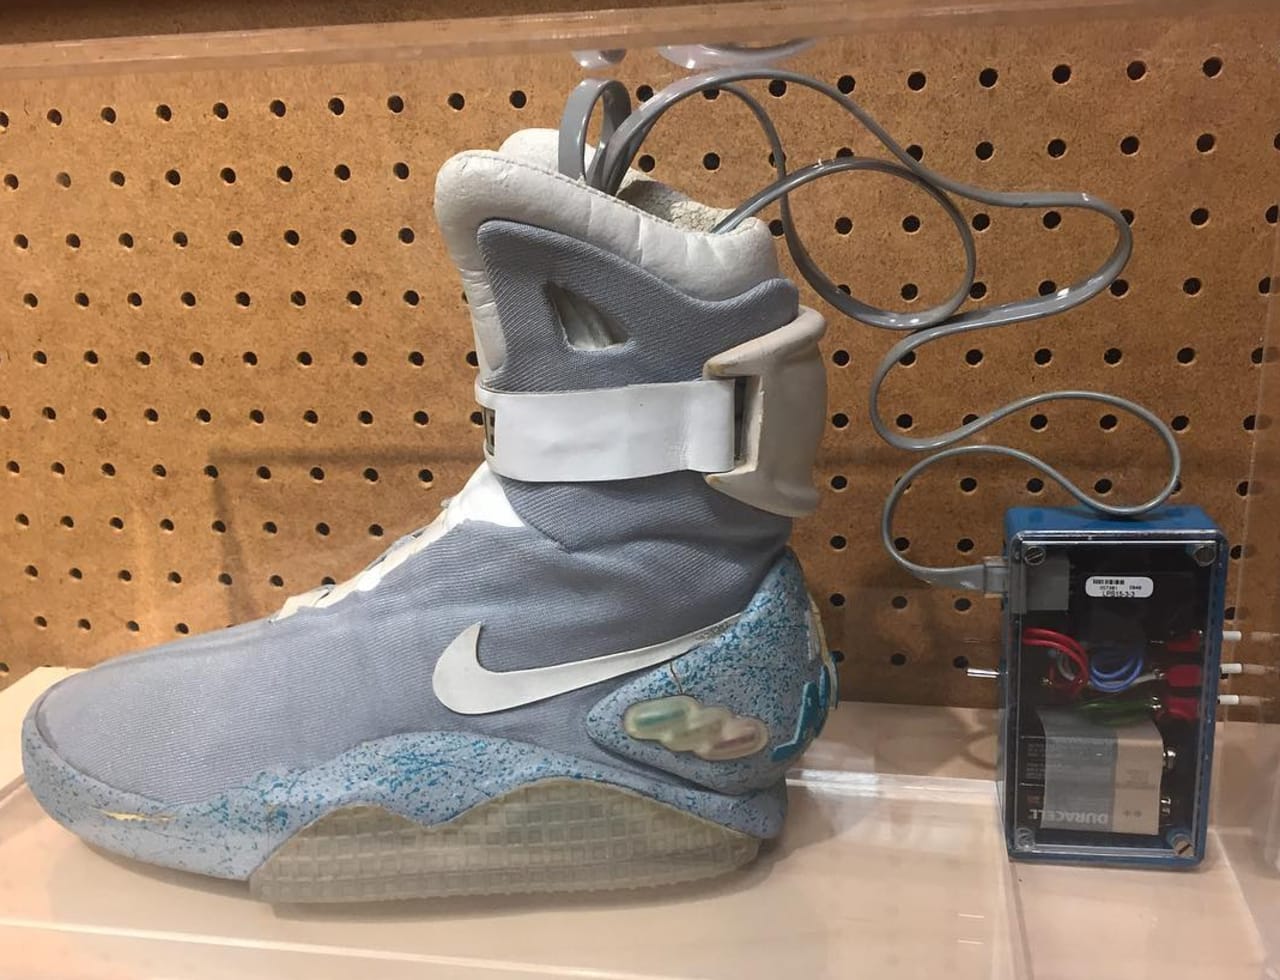 Nike Mag Self Lacing Shoes Prototype 